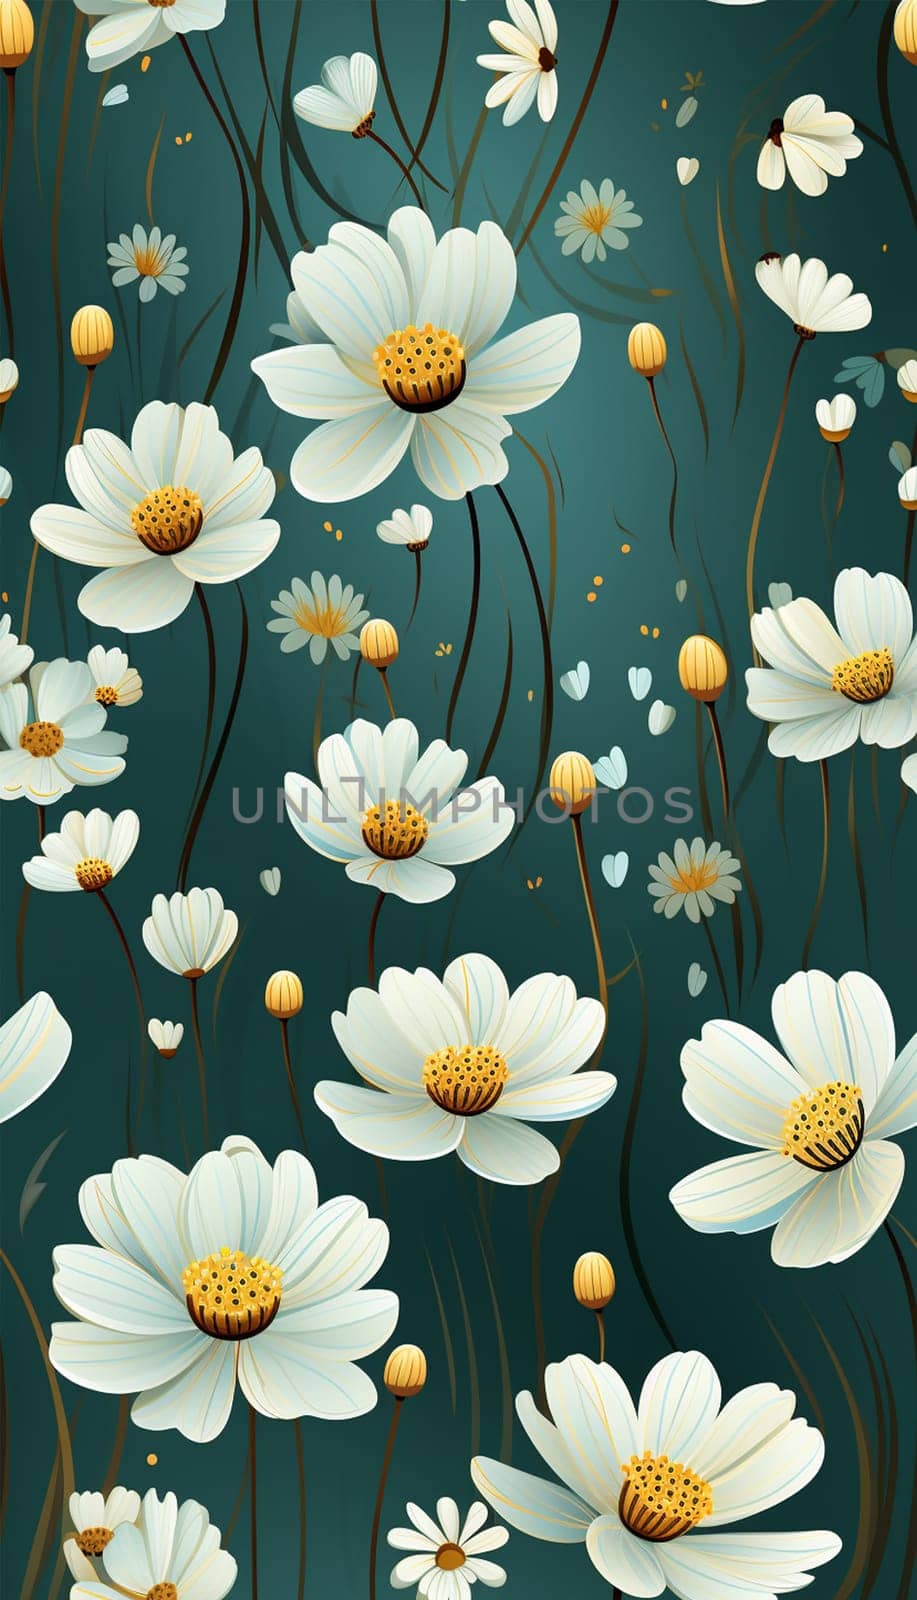 Daisy background. Trendy Hand drawn Wild Meadow florals , Flower bouquet illustration Seamless Pattern Design, Design for fashion , fabric, textile, wallpaper, cover, web , wrapping and all prints by Annebel146